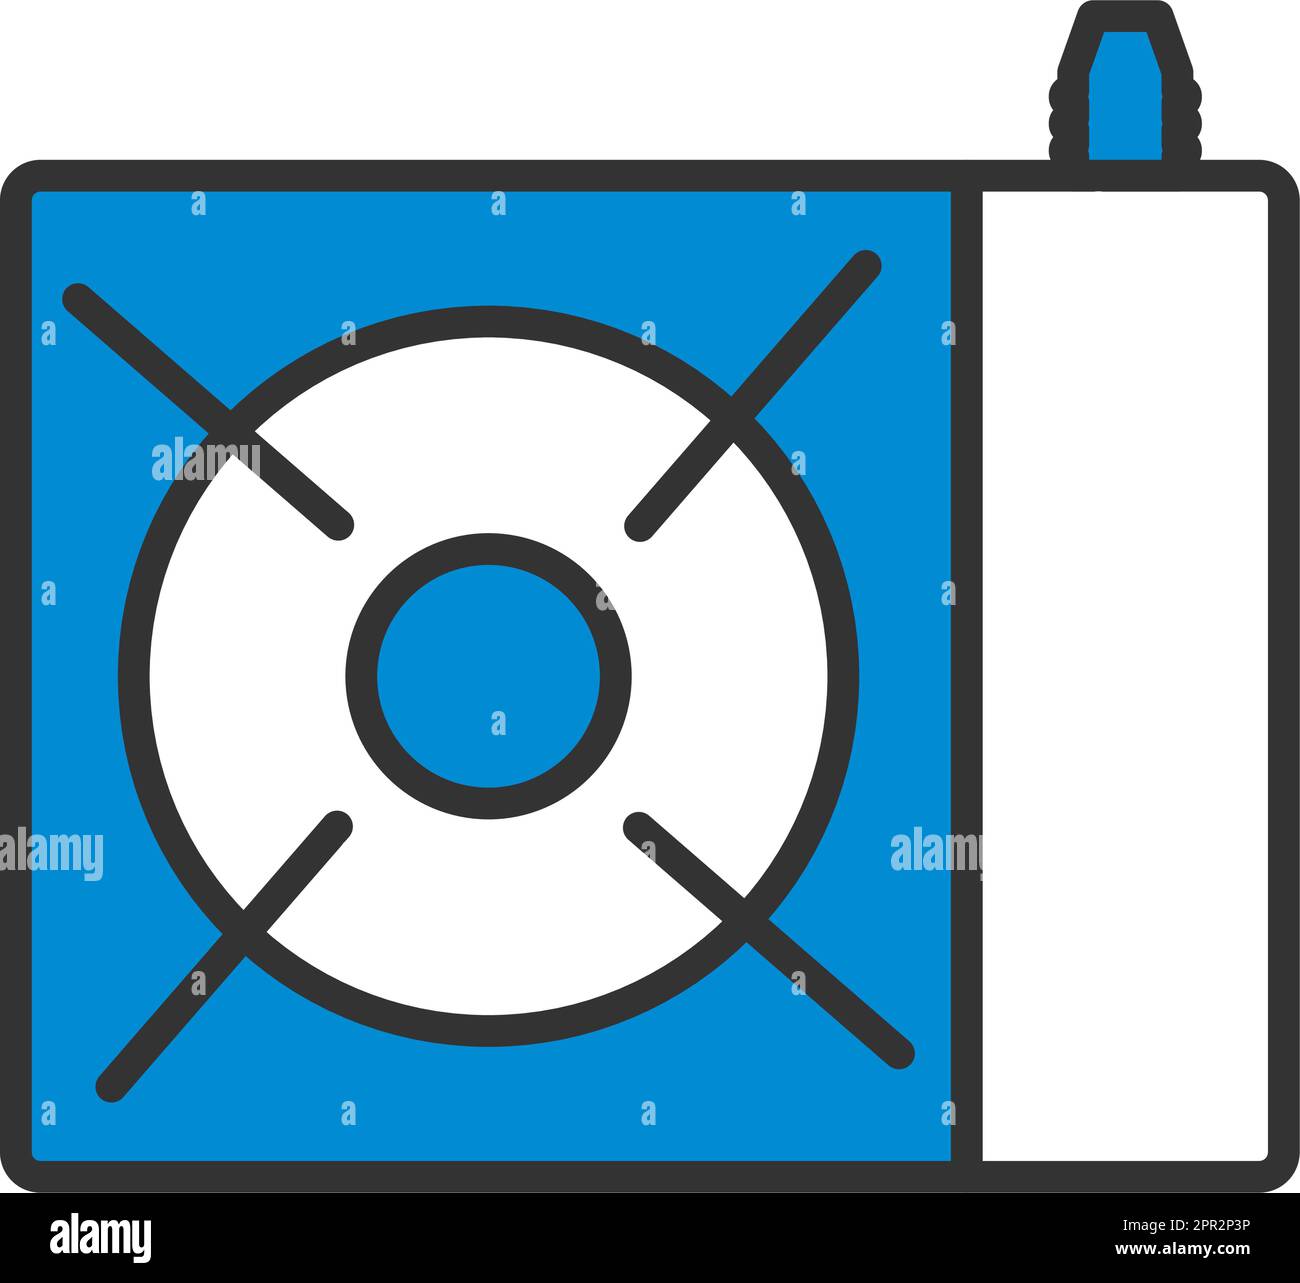 Icon Of Camping Gas Burner Stove Stock Vector